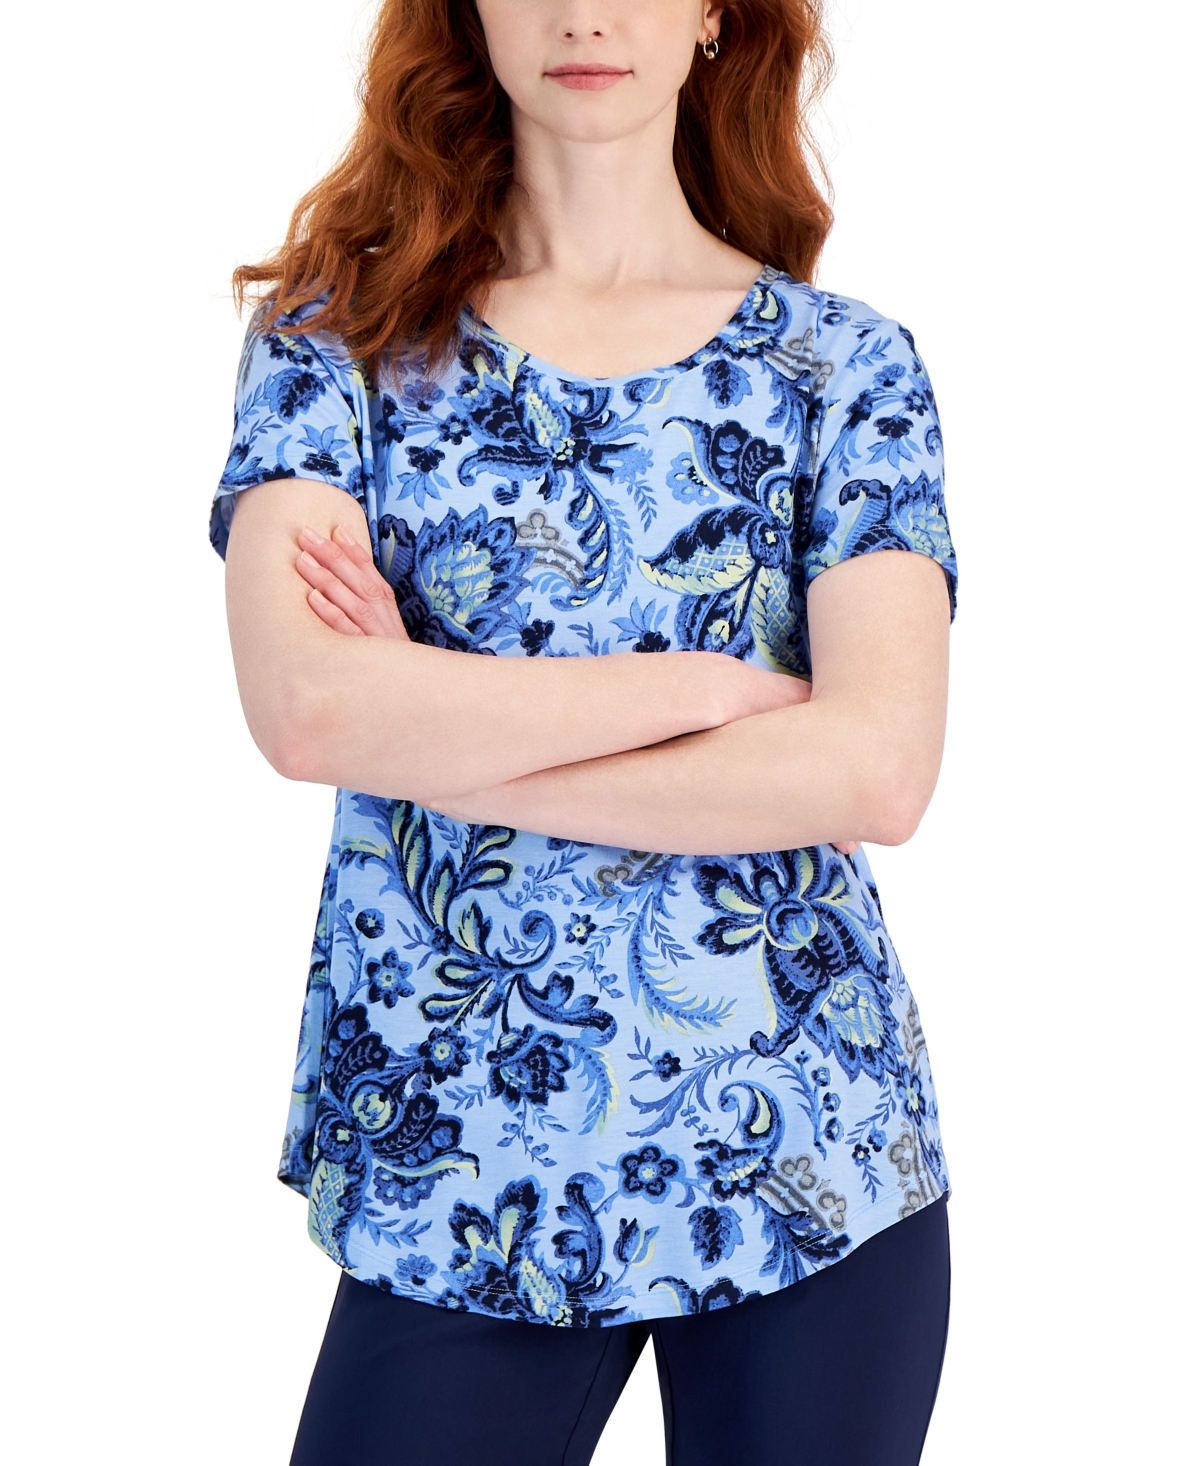 Jm Collection Petite Blooming Bounty Paisley Top, Created For Macy's In Watery Blue Combo